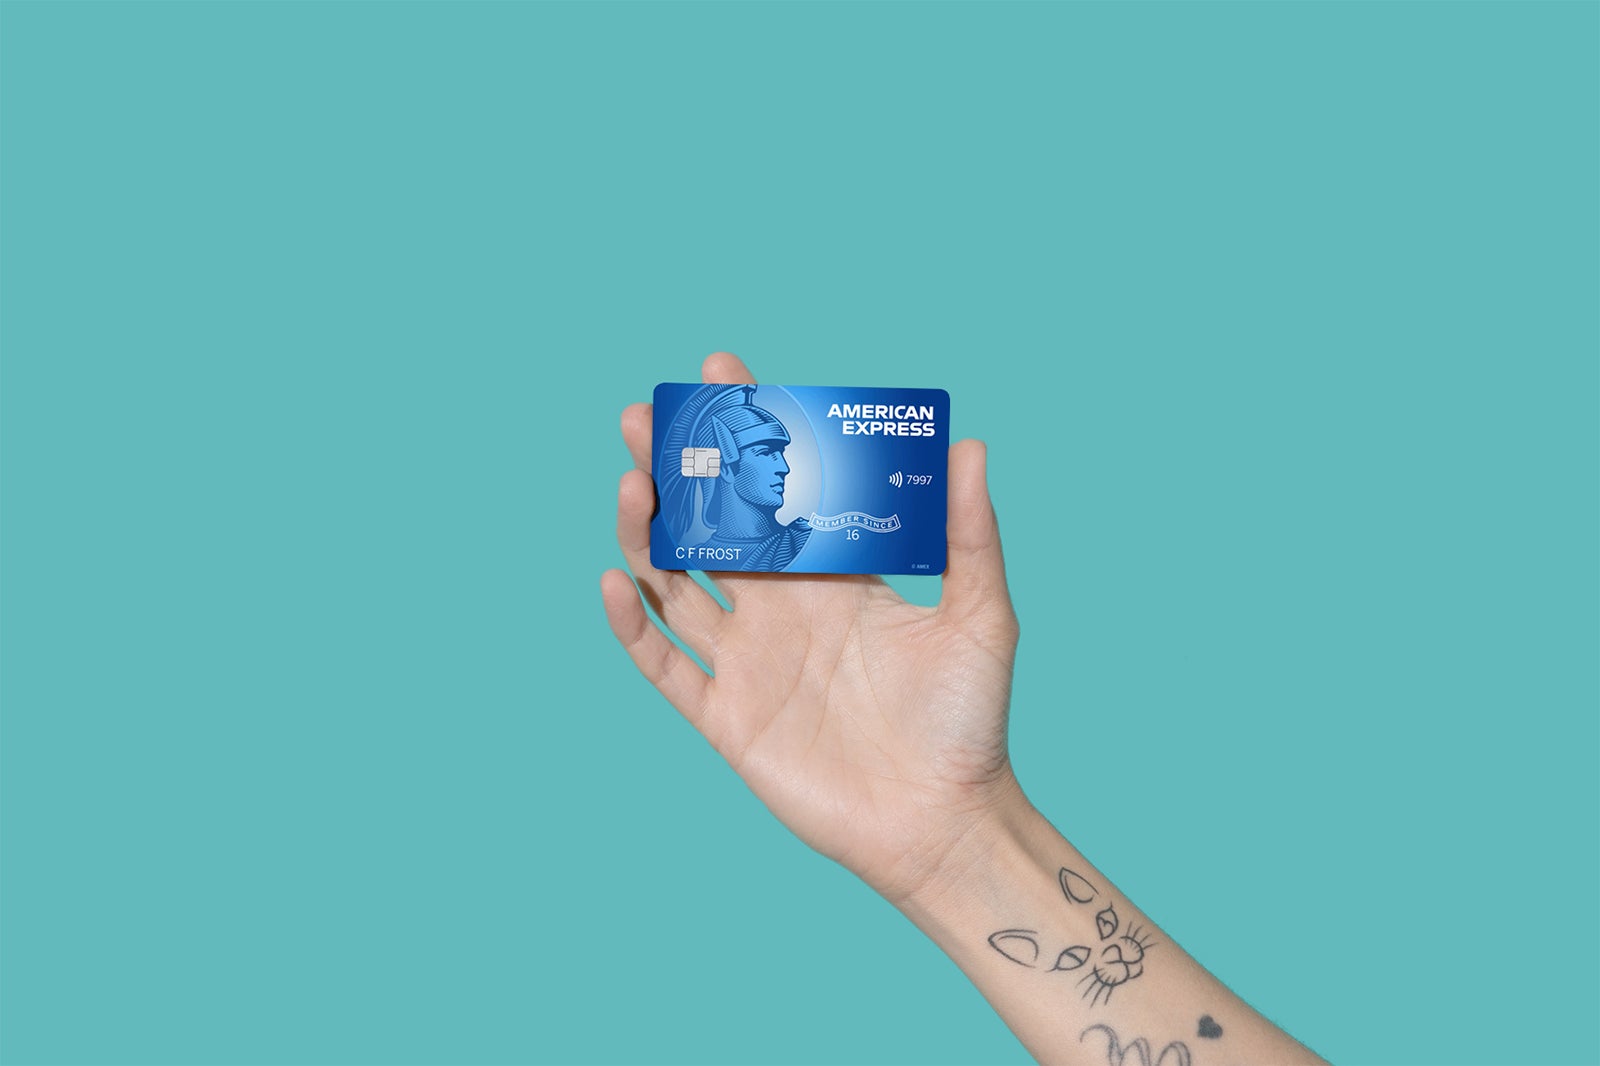 Photo of hand holding the Blue Cash Everyday Card